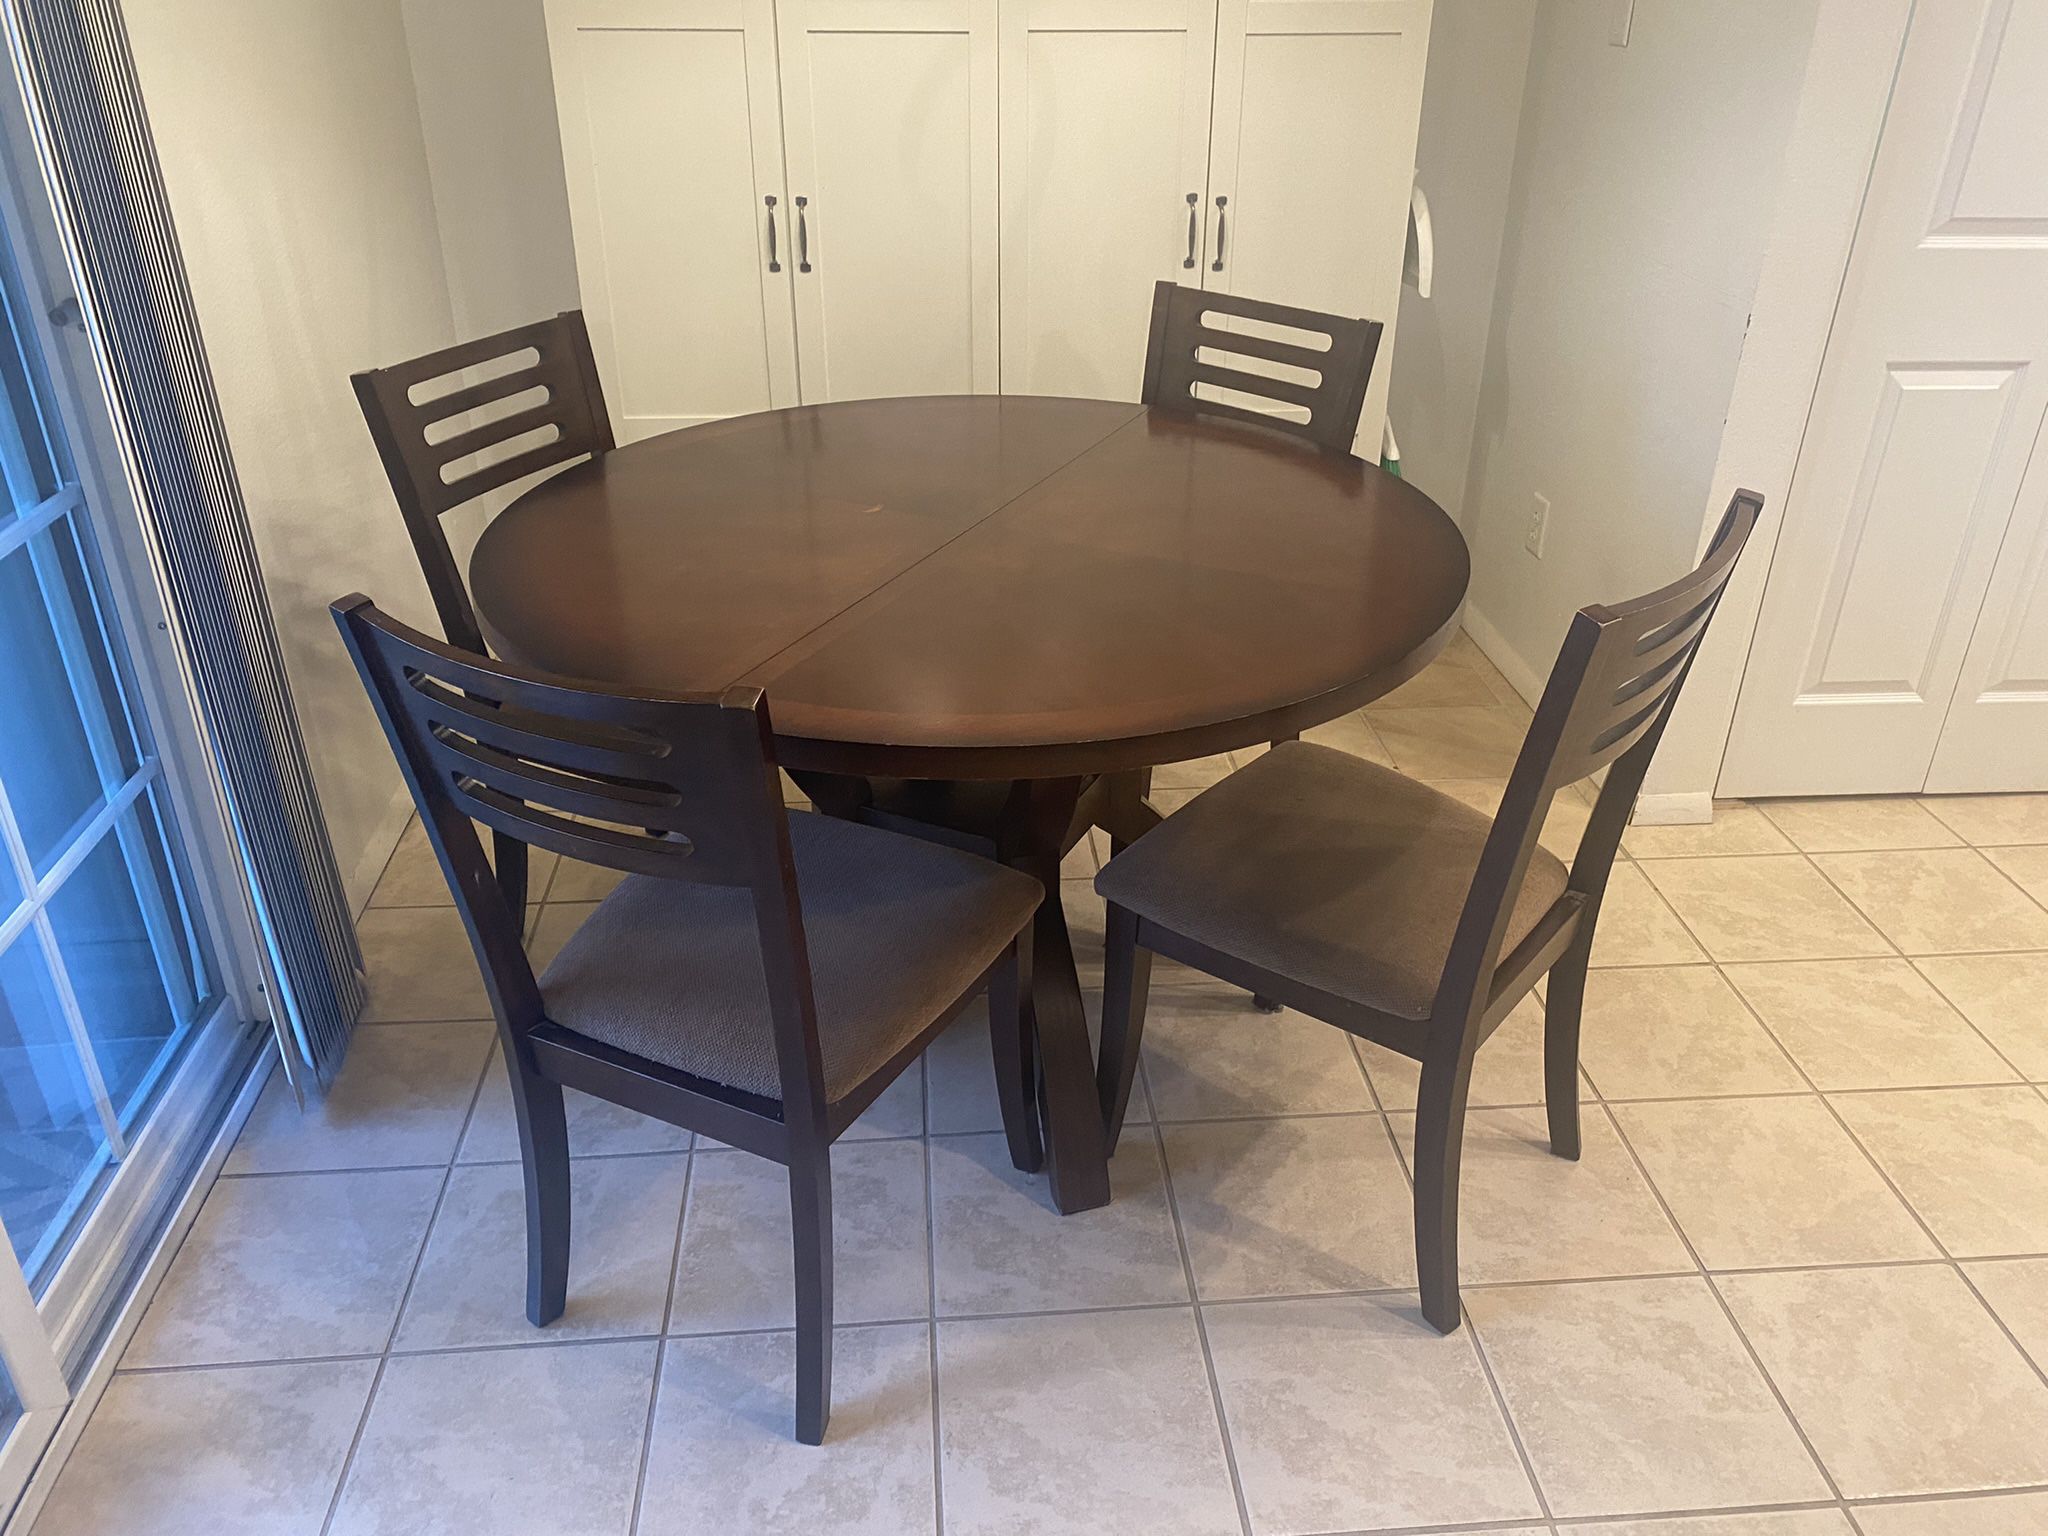 Kitchen Table and 4 Chairs!